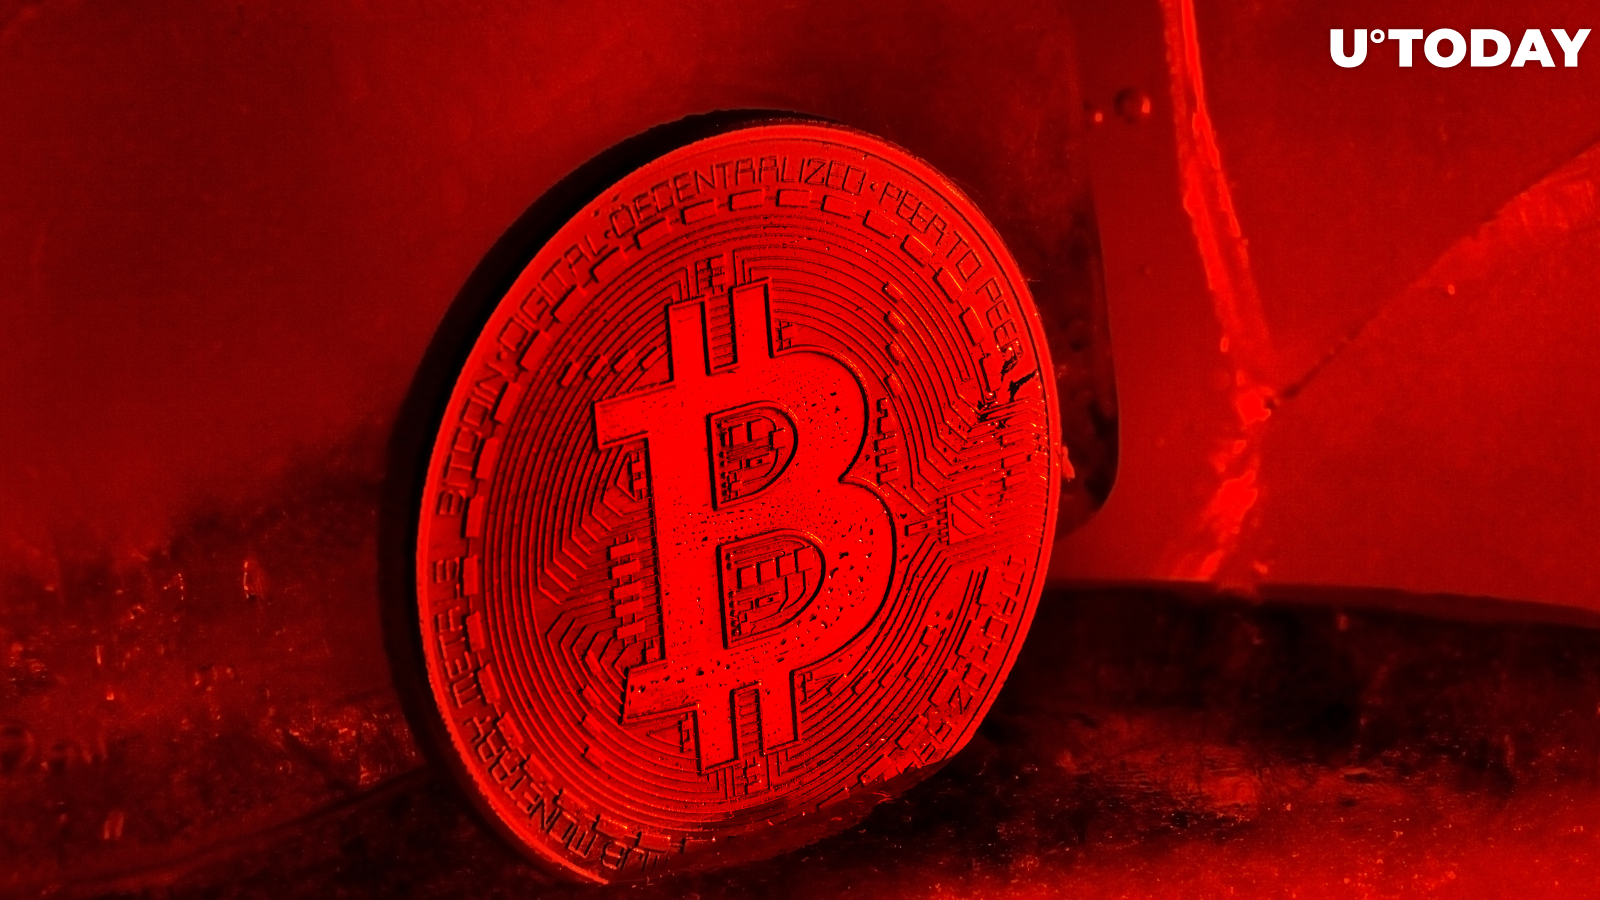 Bitcoin Crashes to $27,000, $183 Million Liquidated. What's Behind Dramatic Plunge?